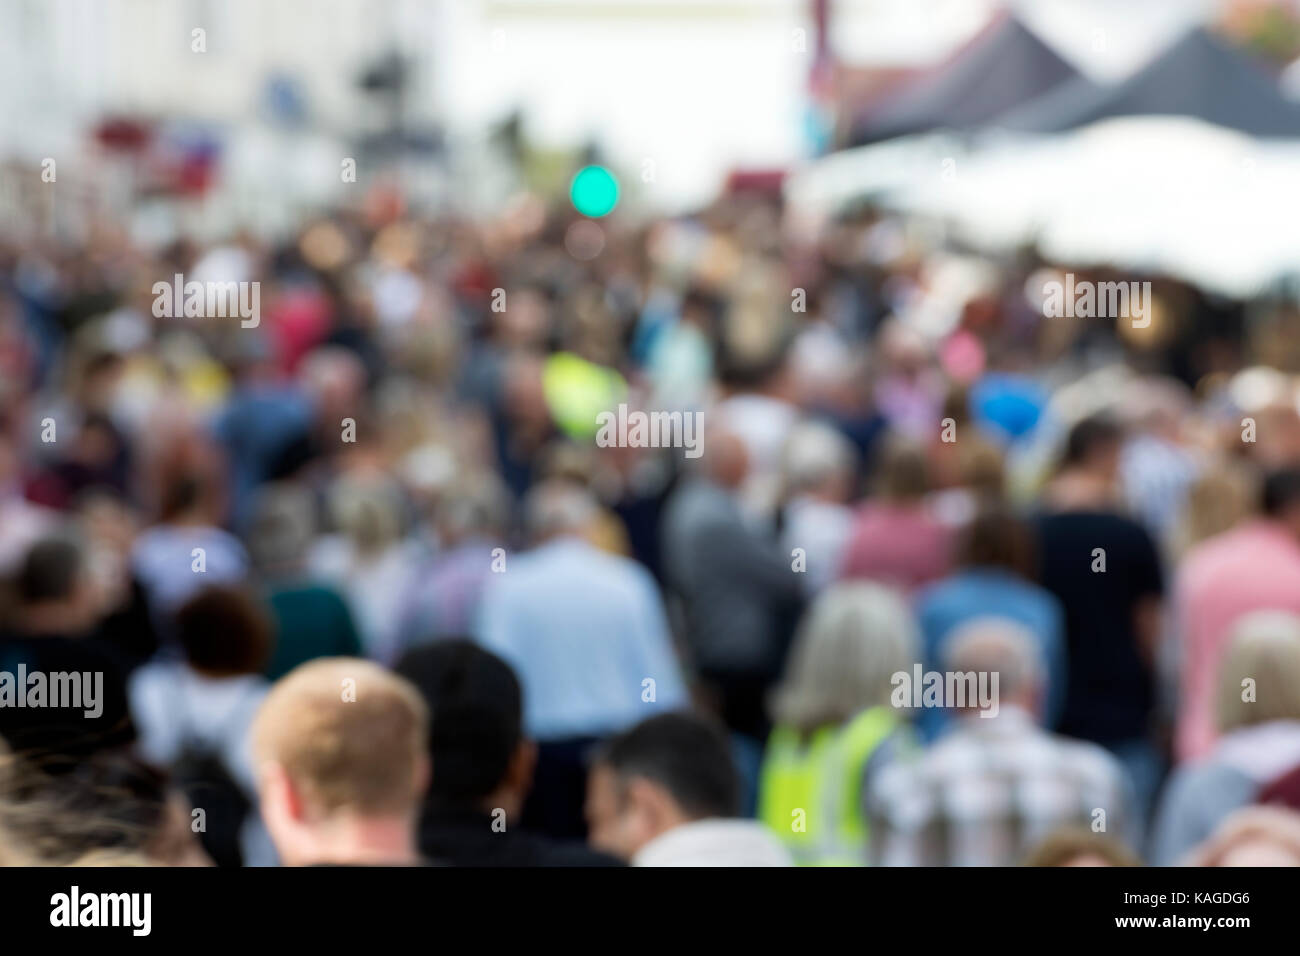 A crowd of people, out of focus Stock Photo